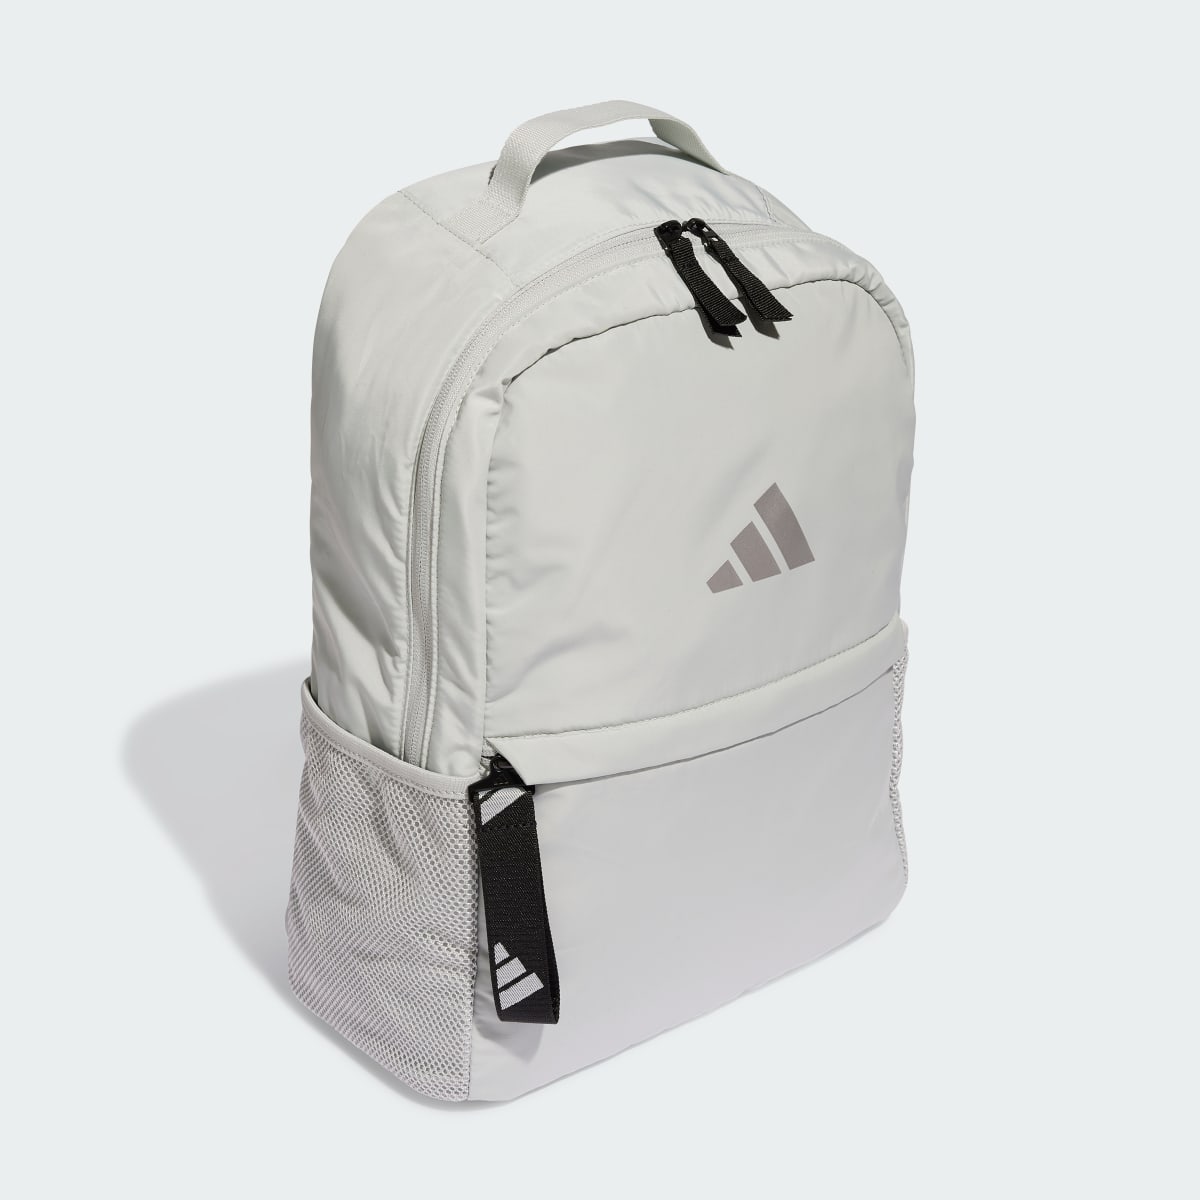 Adidas Sport Padded Backpack. 4